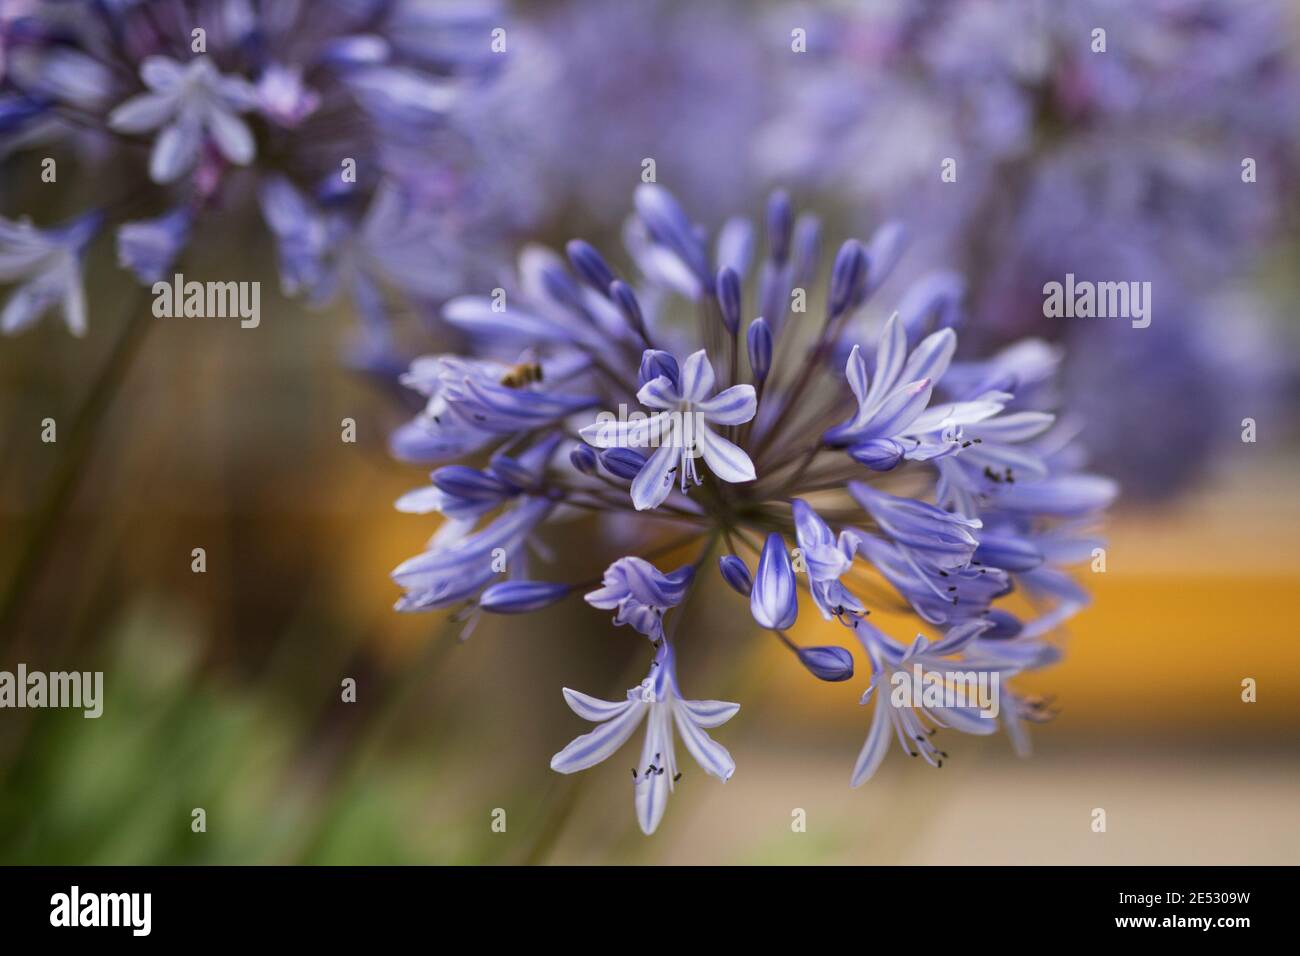 Agapanthus praecox (common agapanthus, blue lily, African lily, or lily of the Nile), a perennial flower native to southern Africa. Stock Photo